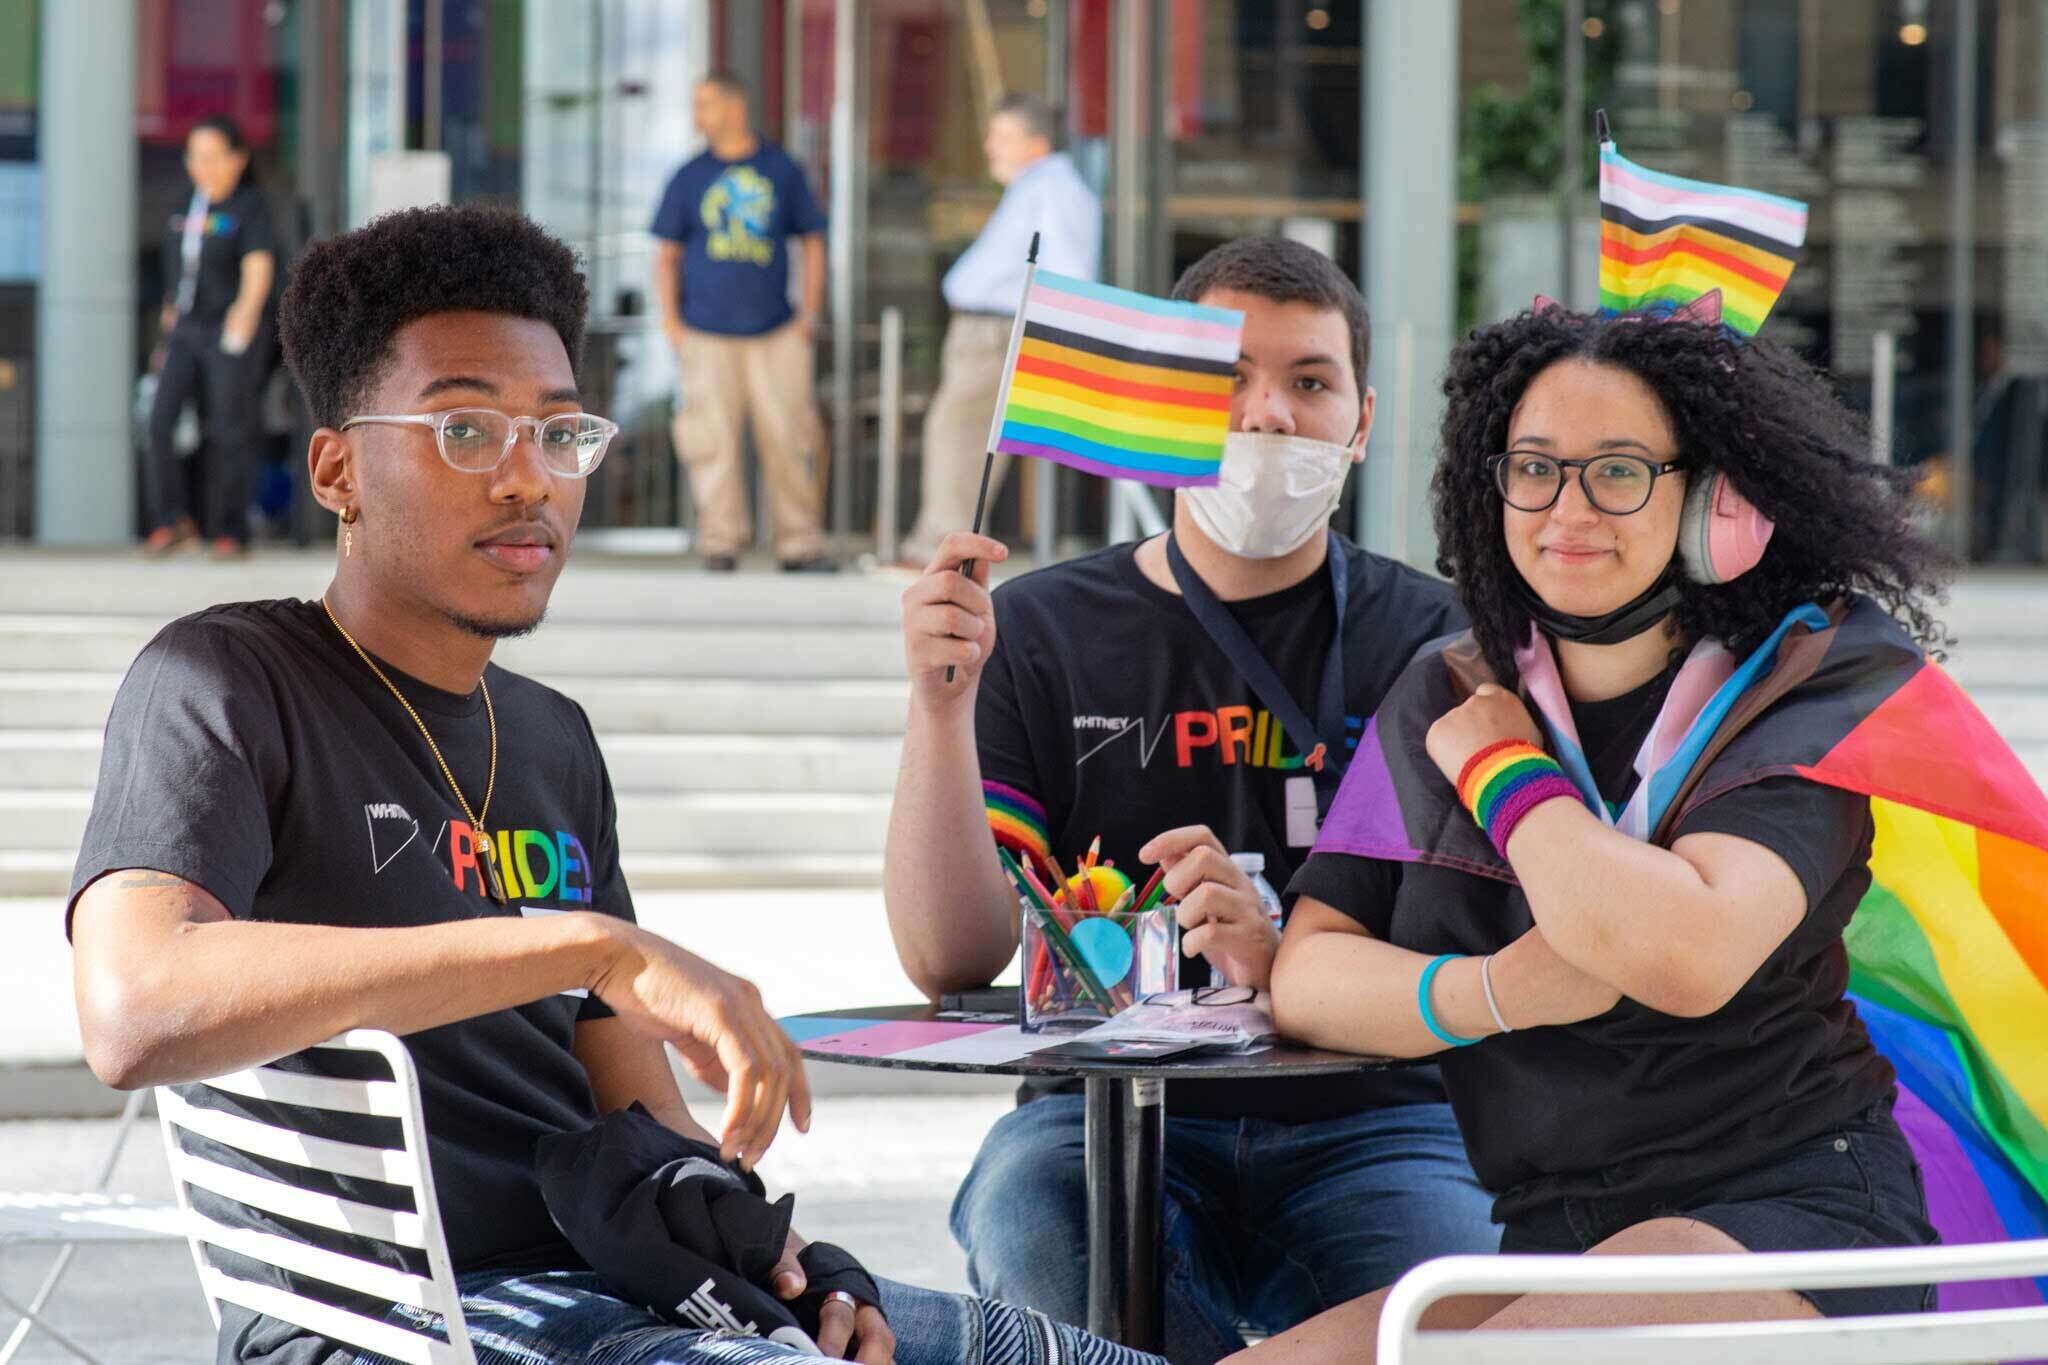 Three teens sit at a table, all donned with the inclusive LGBTQ pride flag.